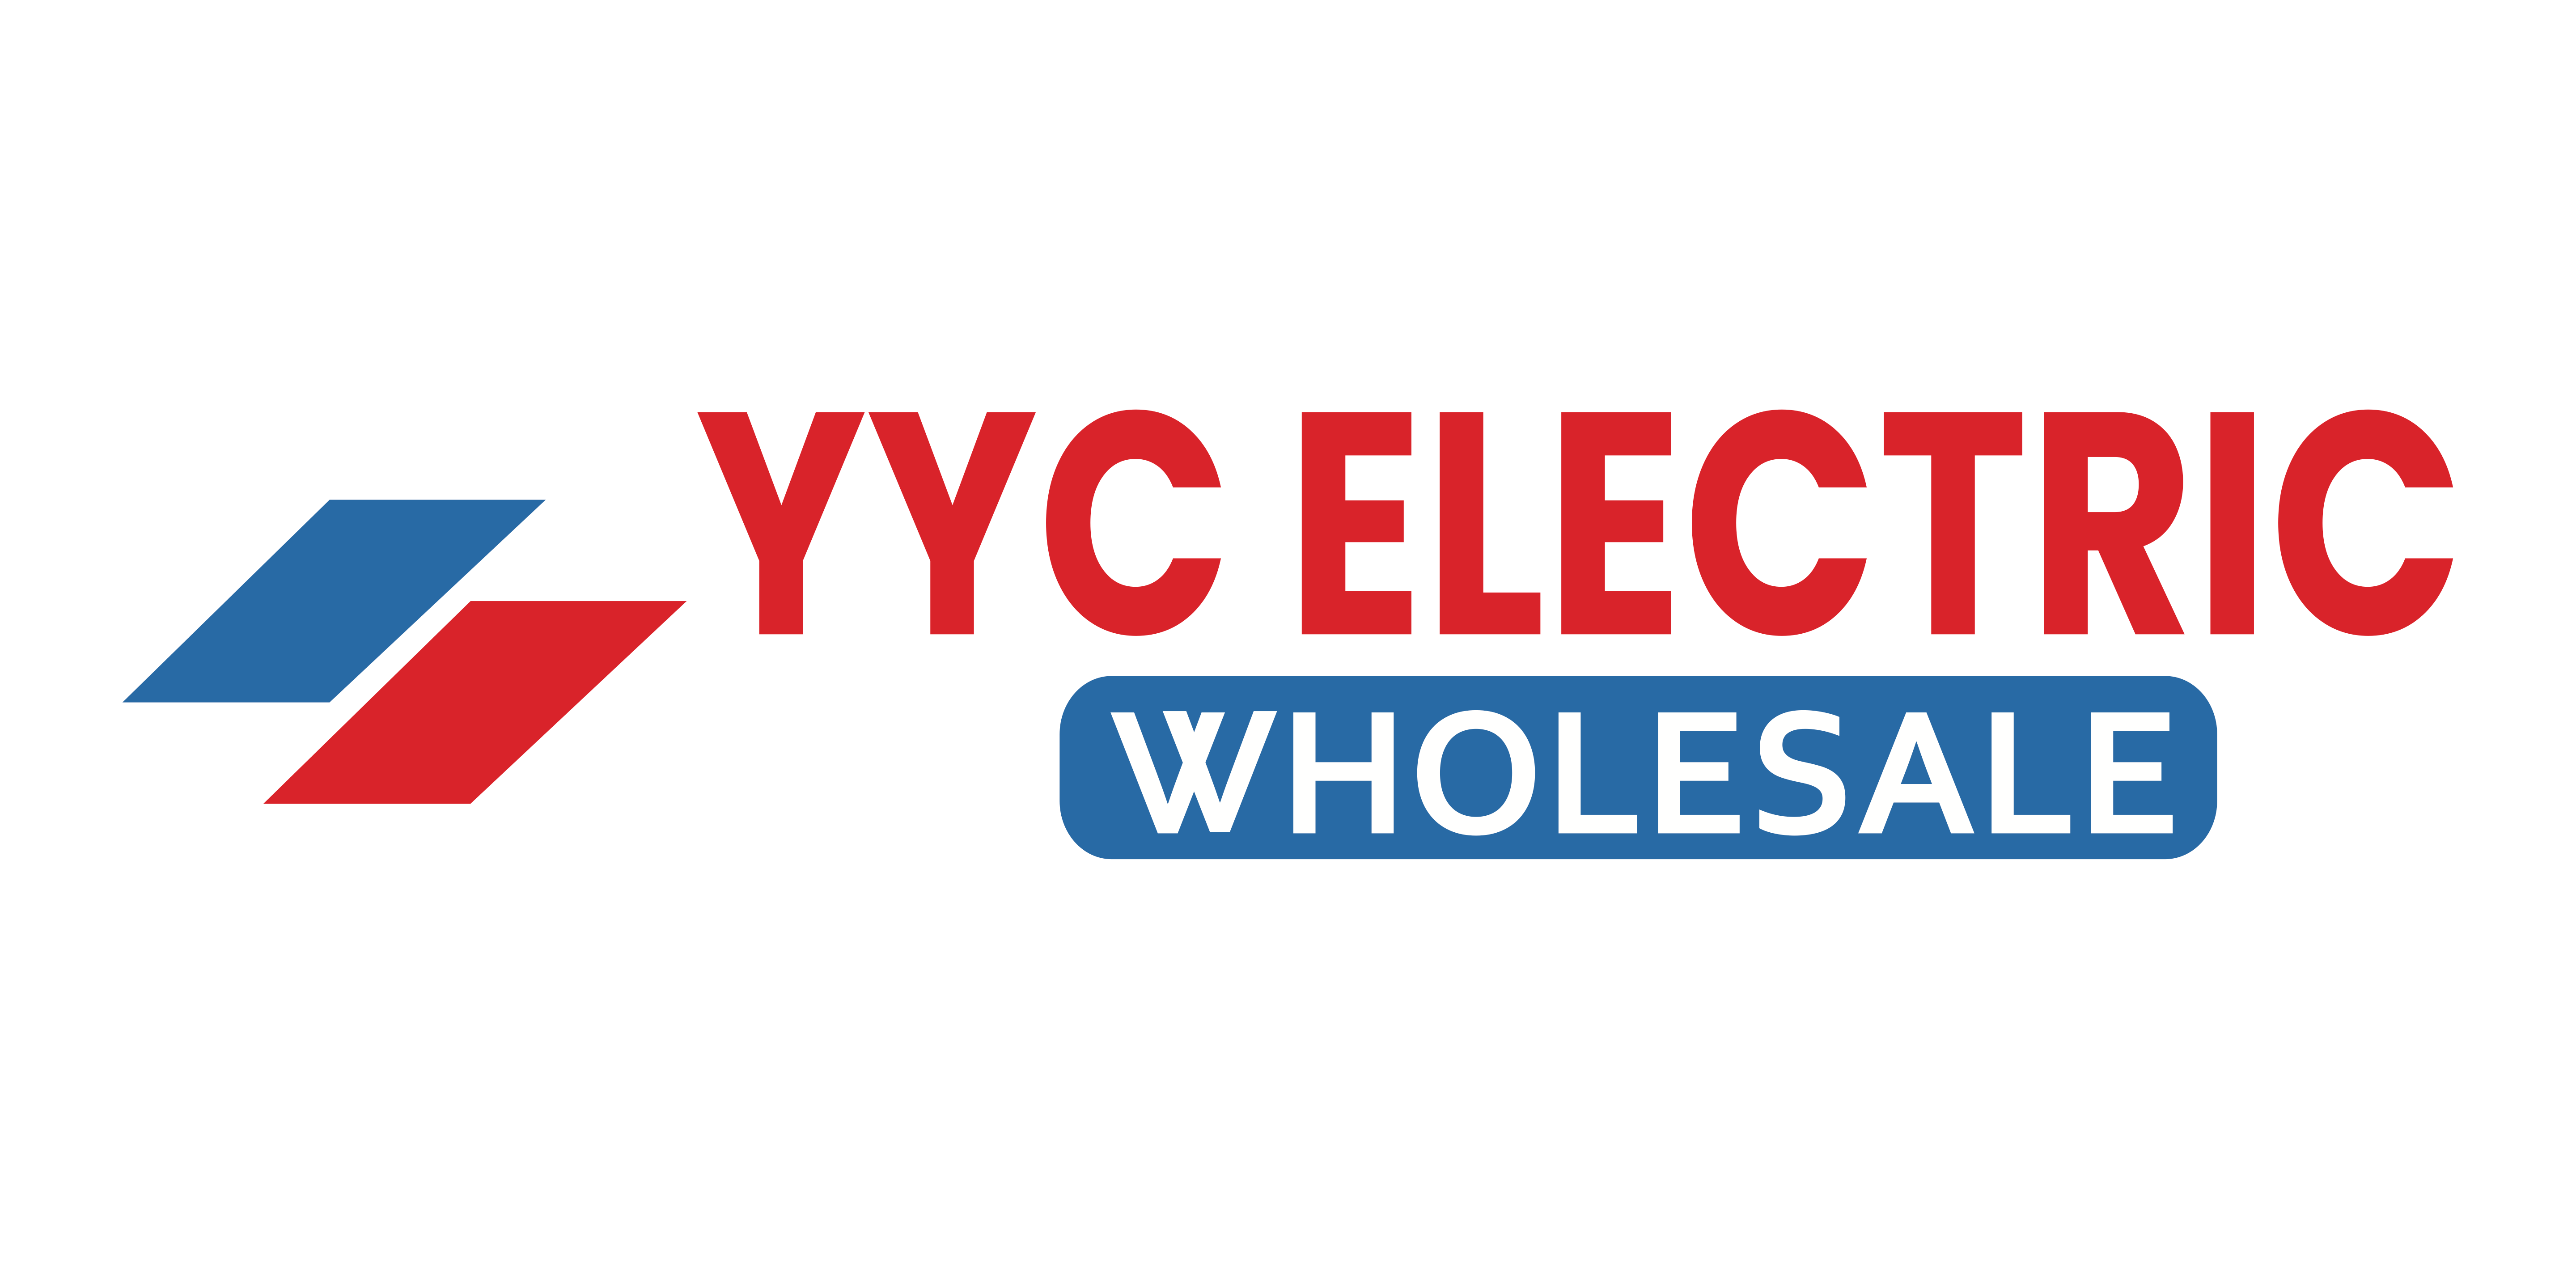 YYC ELECTRIC WHOLESALE